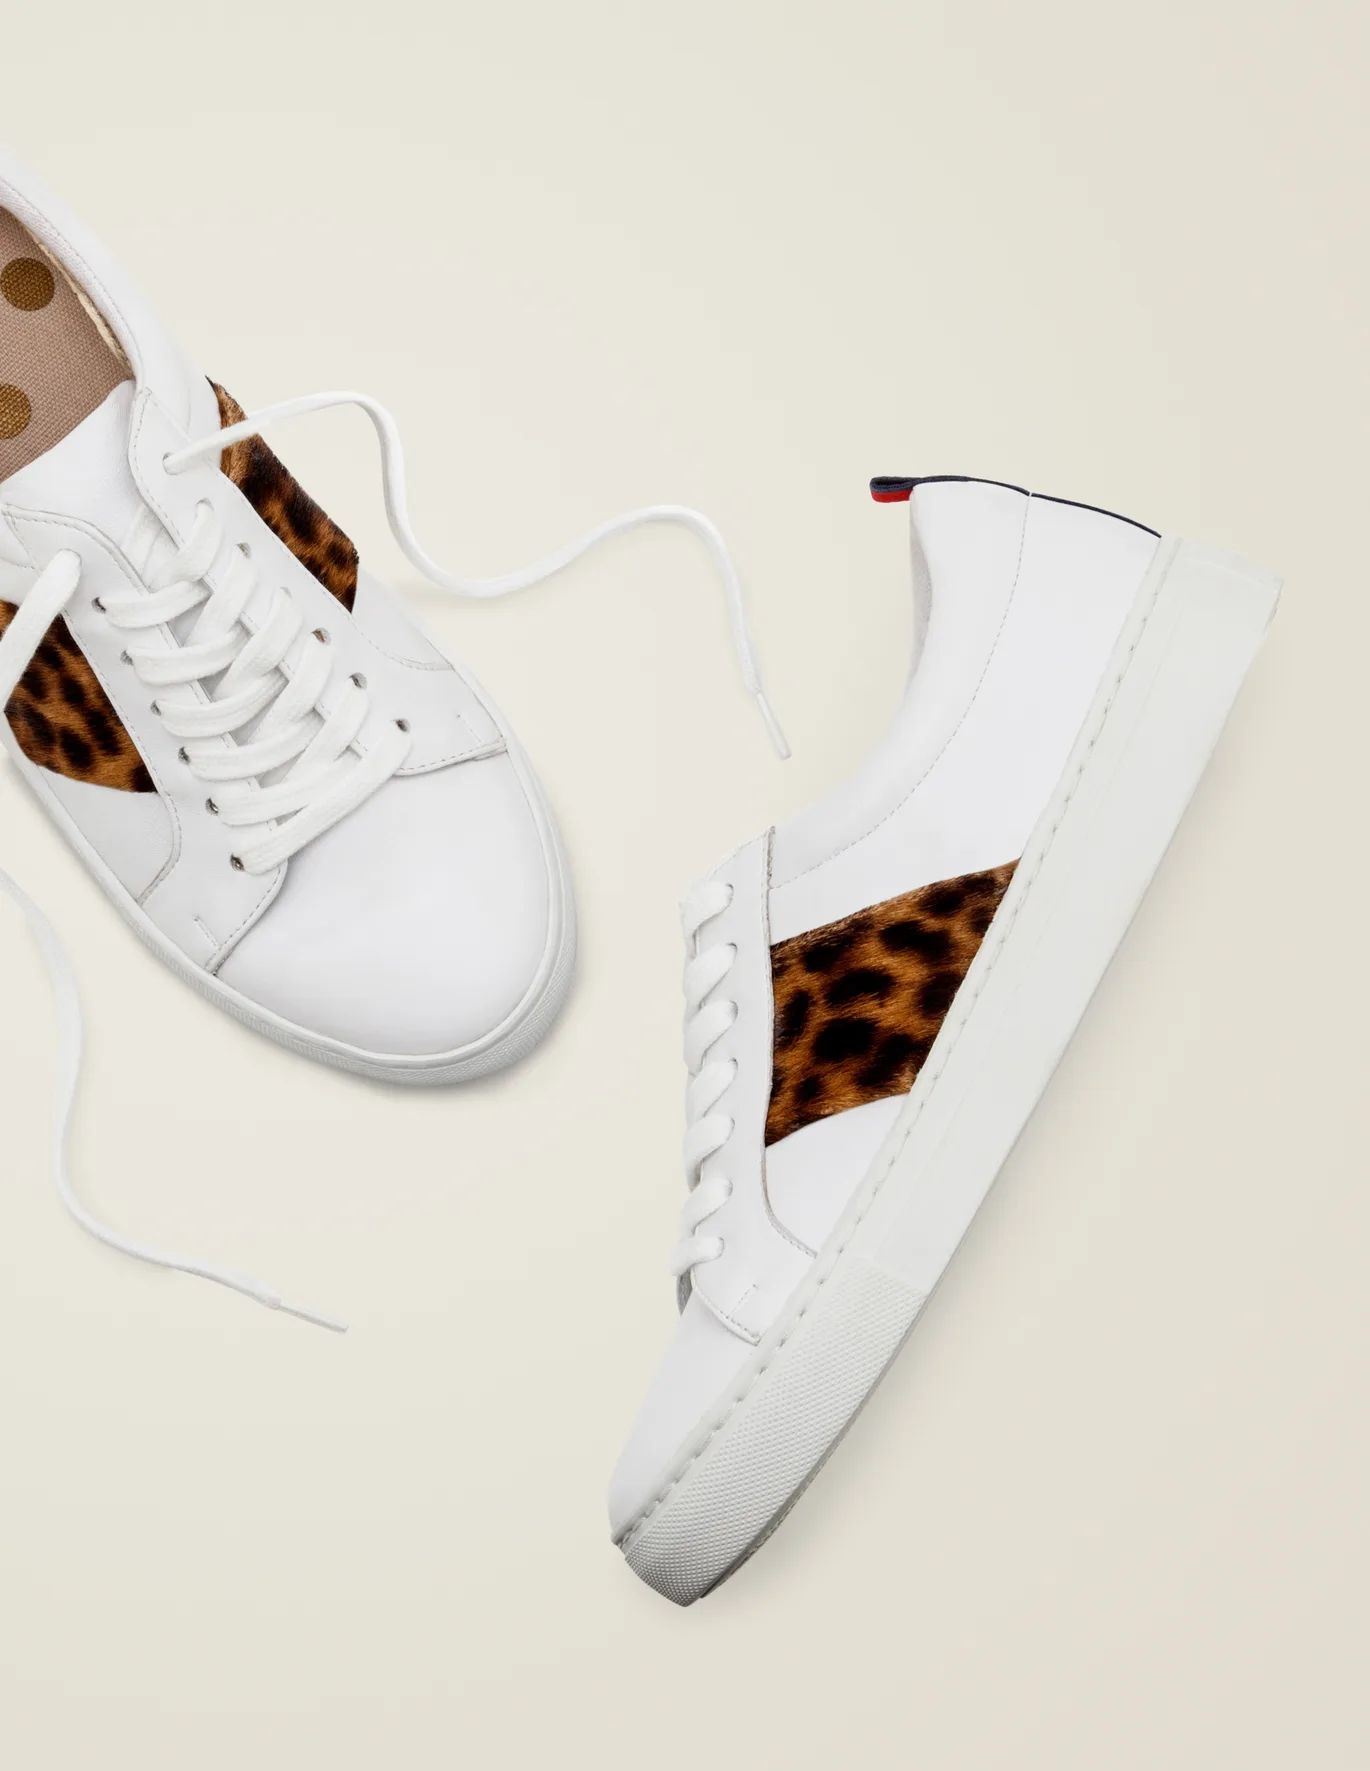 Classic Sneakers - White/Tan Leopard | Boden US | Boden (US)